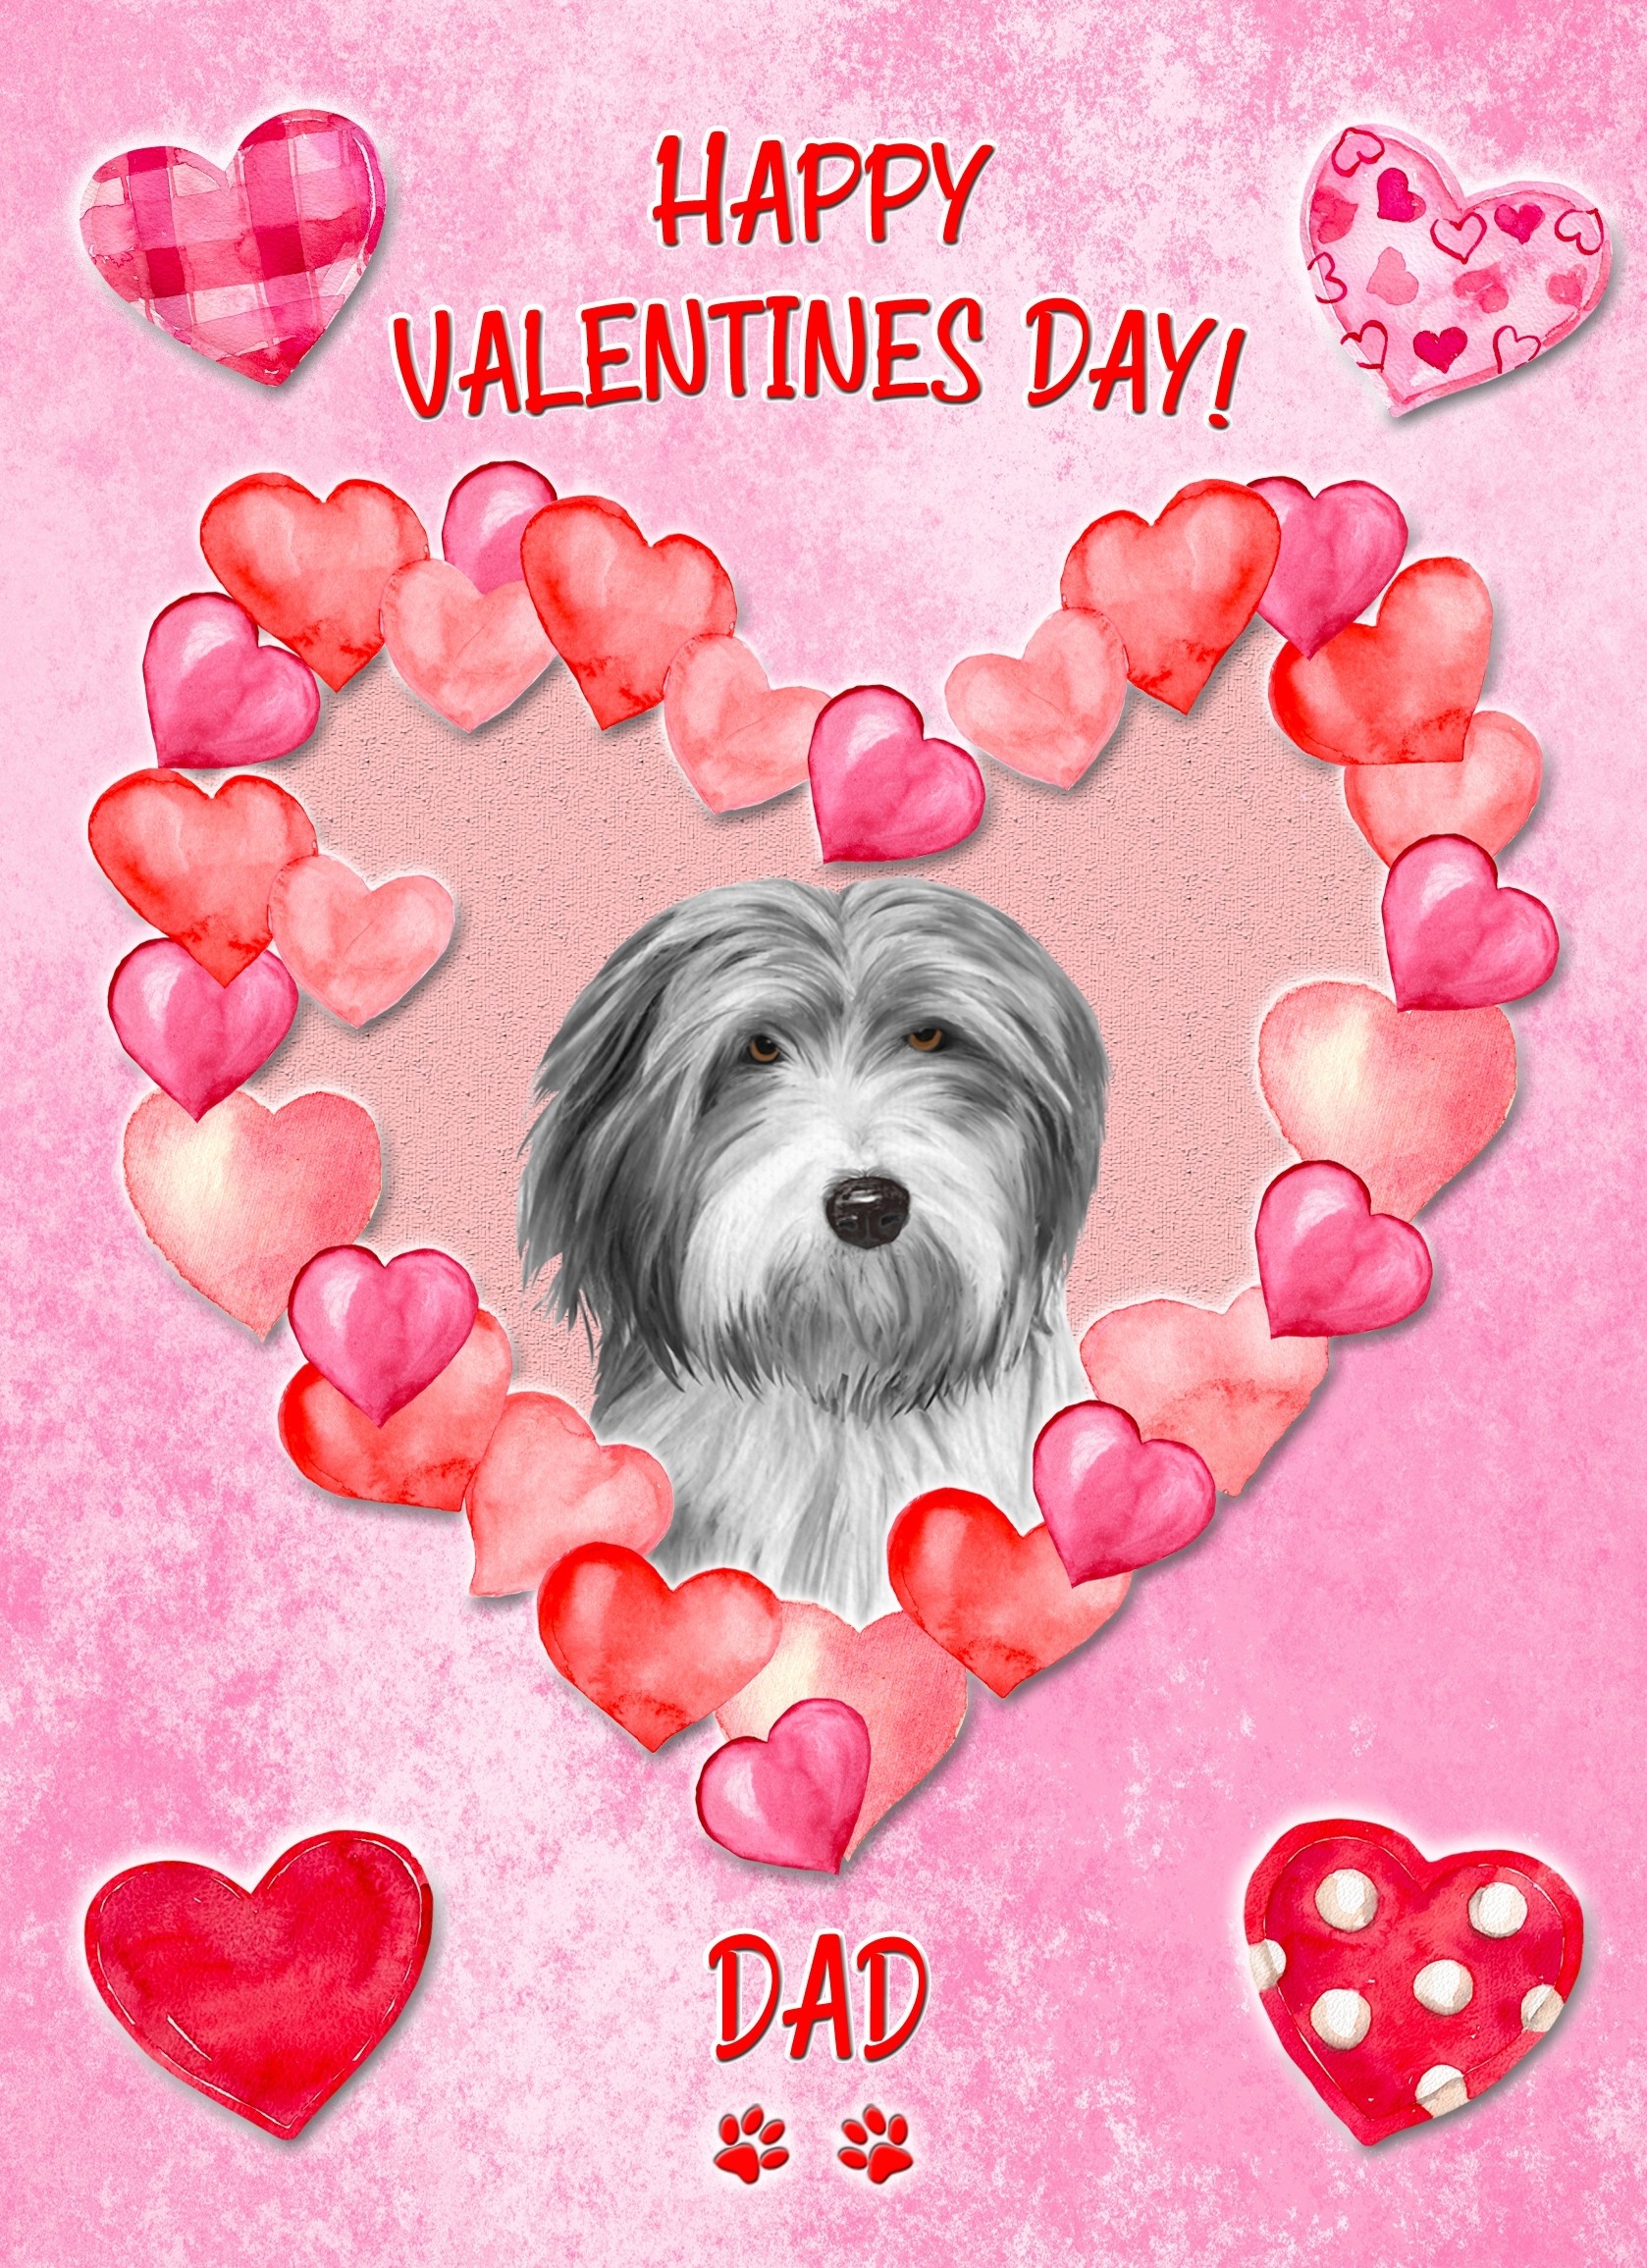 Bearded Collie Dog Valentines Day Card (Happy Valentines, Dad)